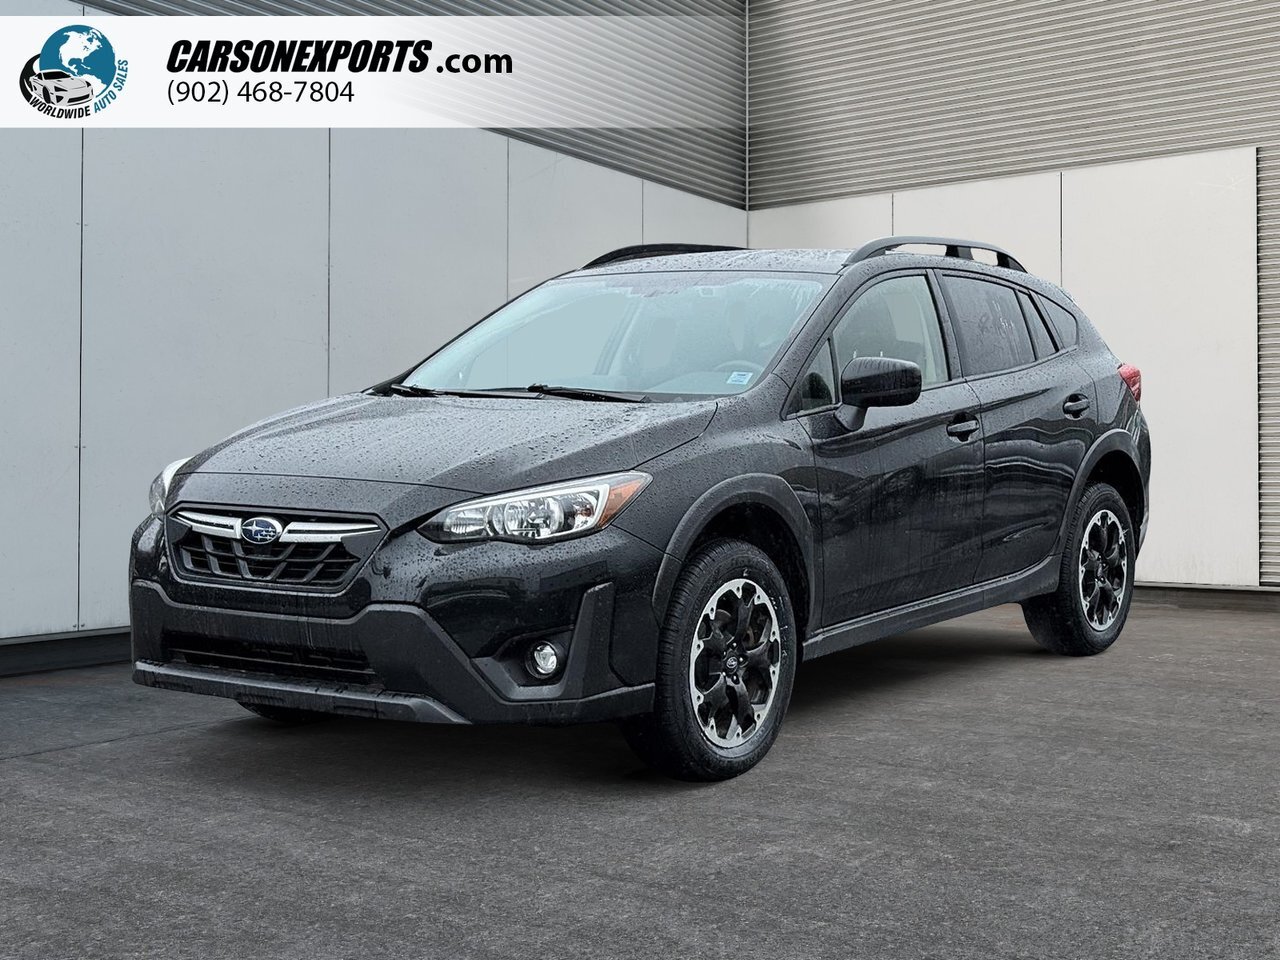 2021 Subaru Crosstrek Touring The best place to buy a used car. Period.